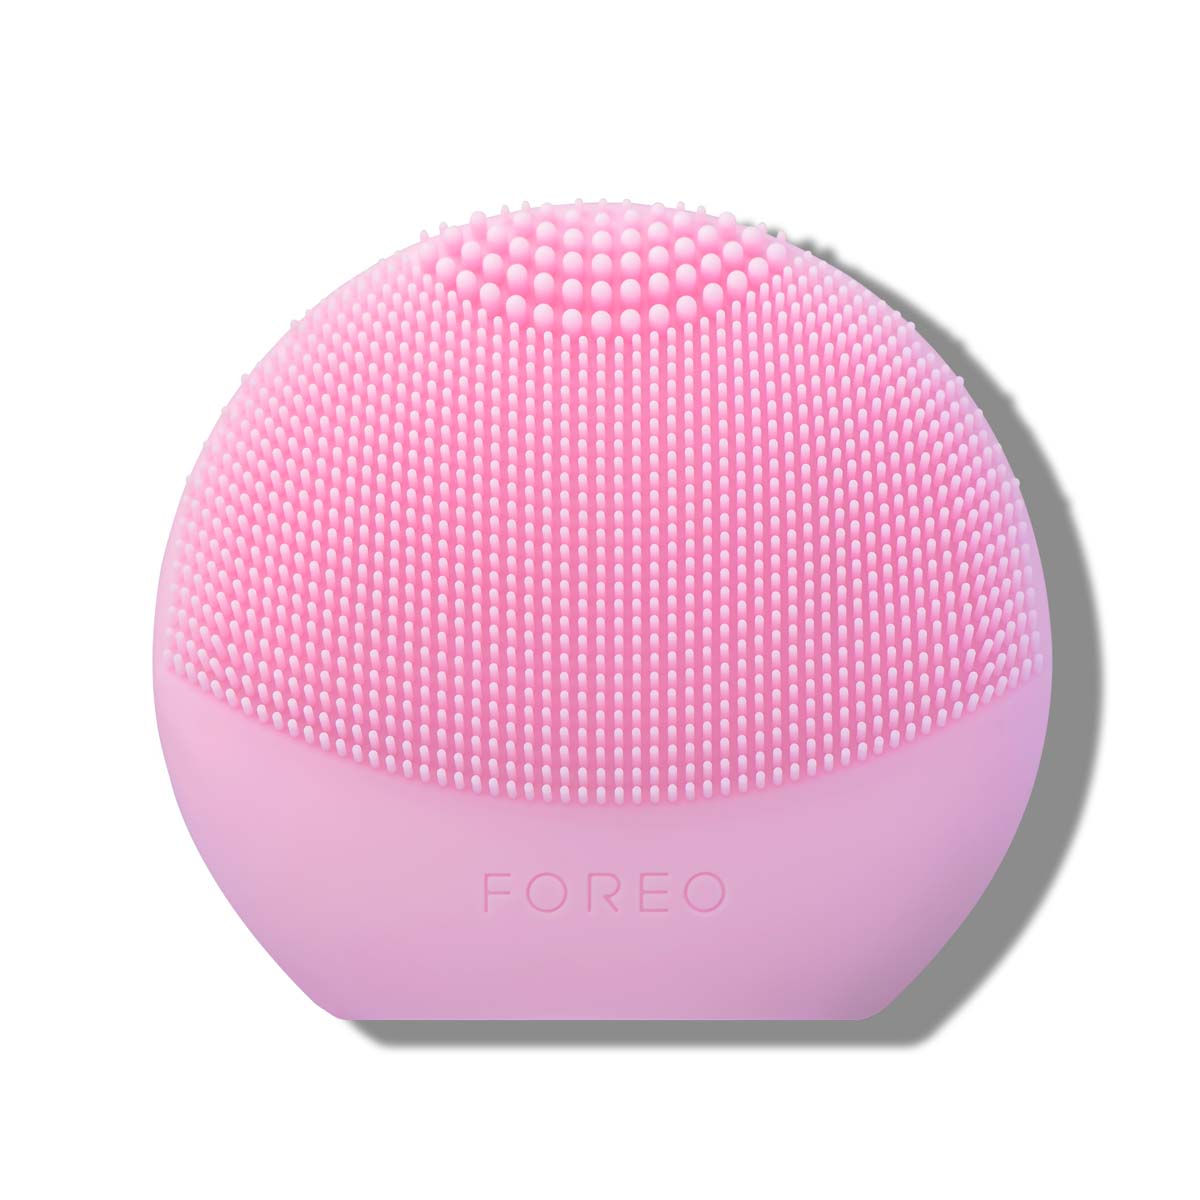 FOREO LUNA Play Smart 2 Smart Skin Analysis And Facial Cleansing Device Tickle Me Pink!